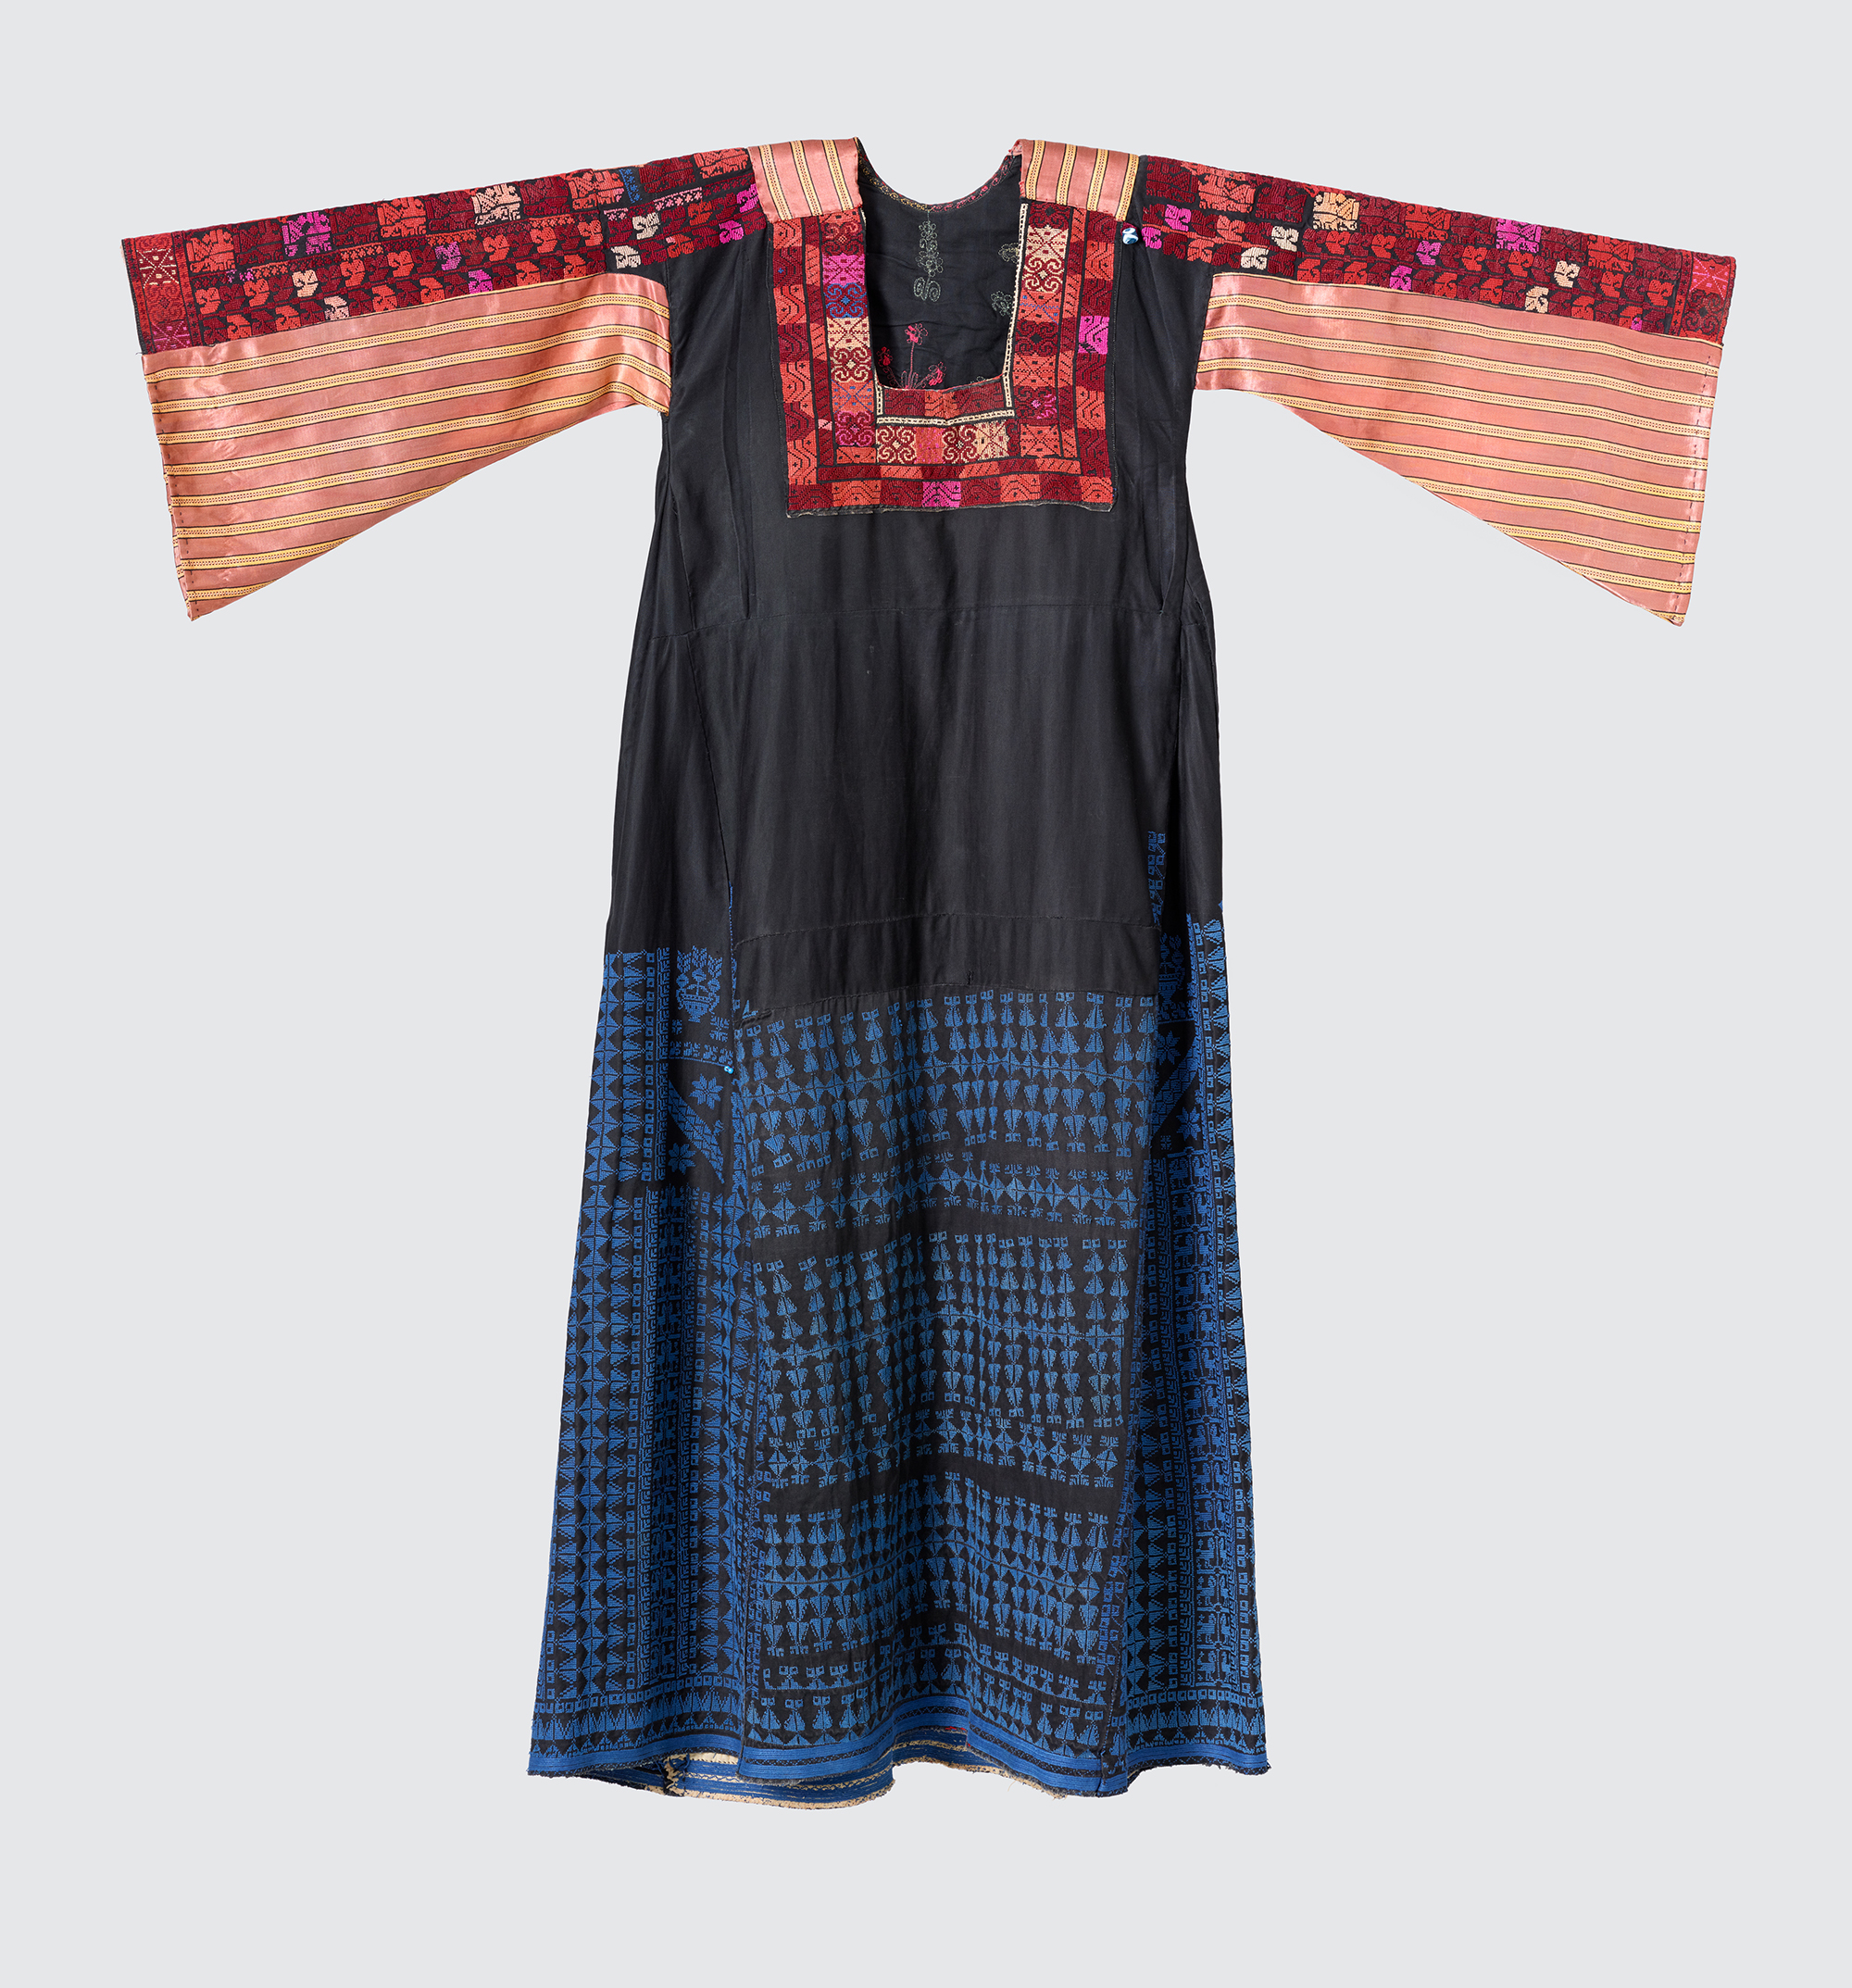 Blue festive dress for an unmarried woman. The dominant color blue stands for sexual inactivity. Collected by Widad Kamel Kawar, 1996, region of origin: Negev-North Sinai (border region with Egypt), ca. 1945.